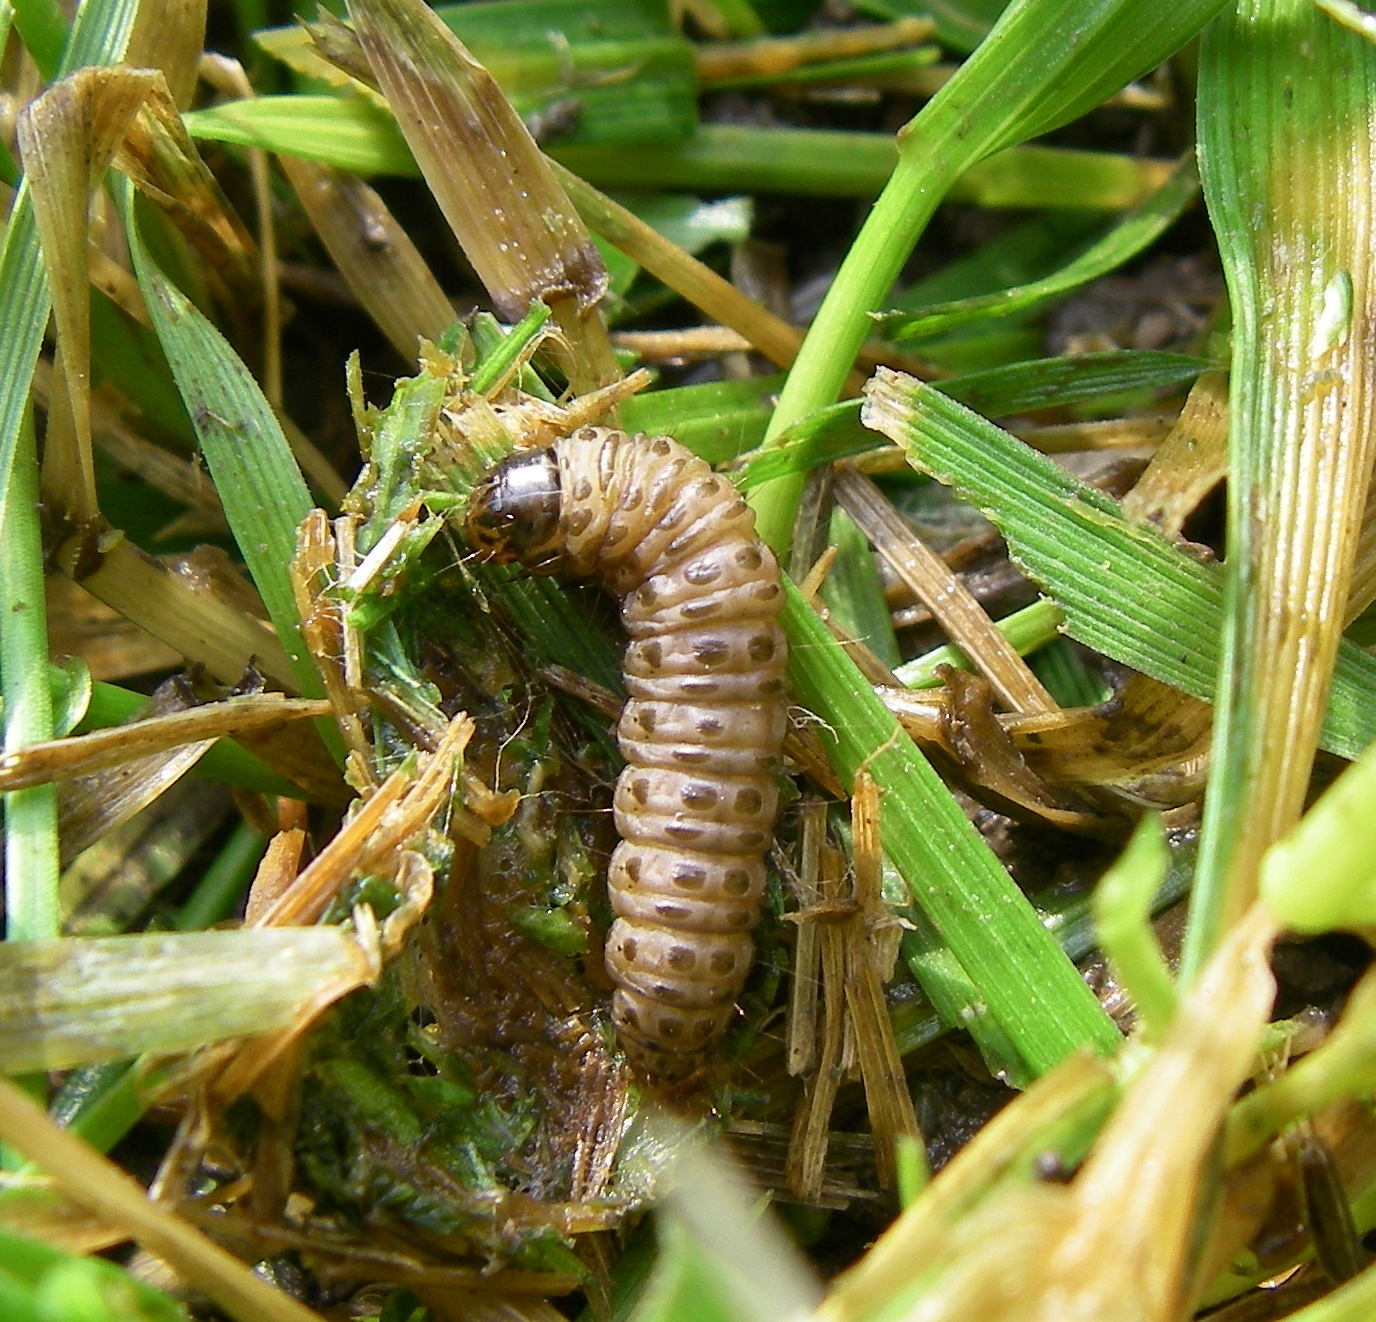 Figure 12. Sod webworm caterpillar with rows of dark, square spots.